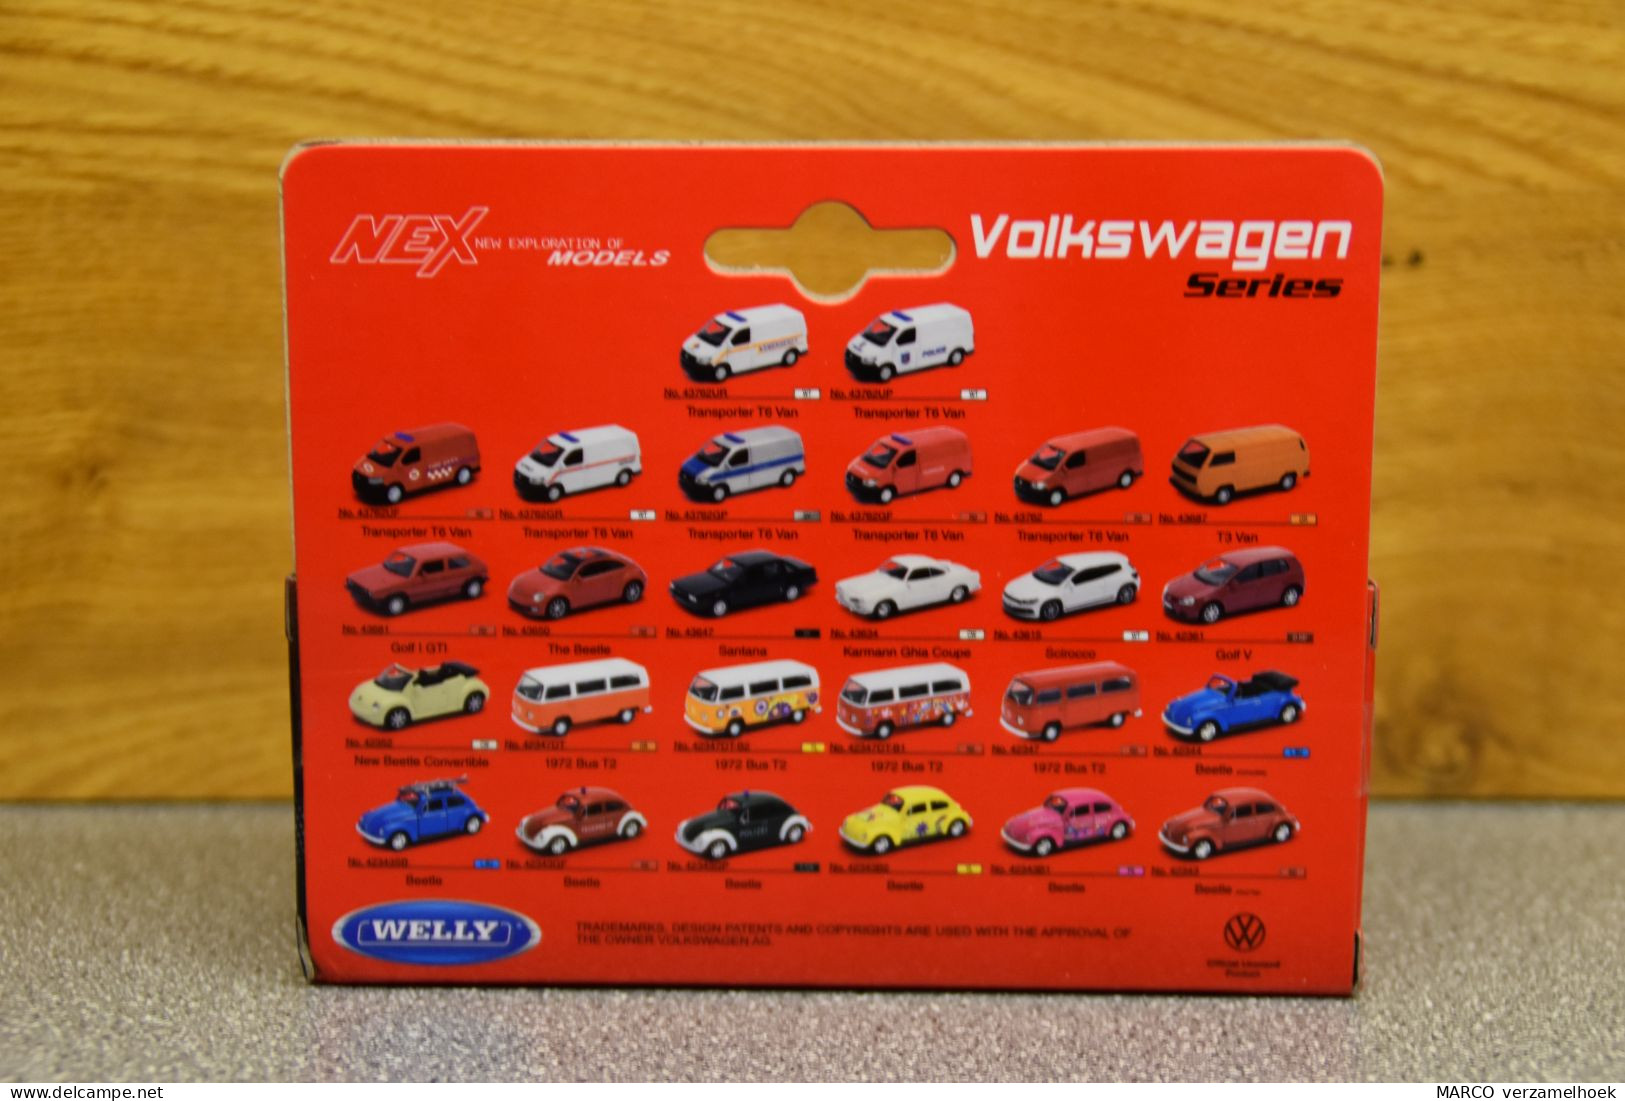 42343B1 Welly NEX VW Volkswagen Beetle-kever Scale 1:43 - Welly